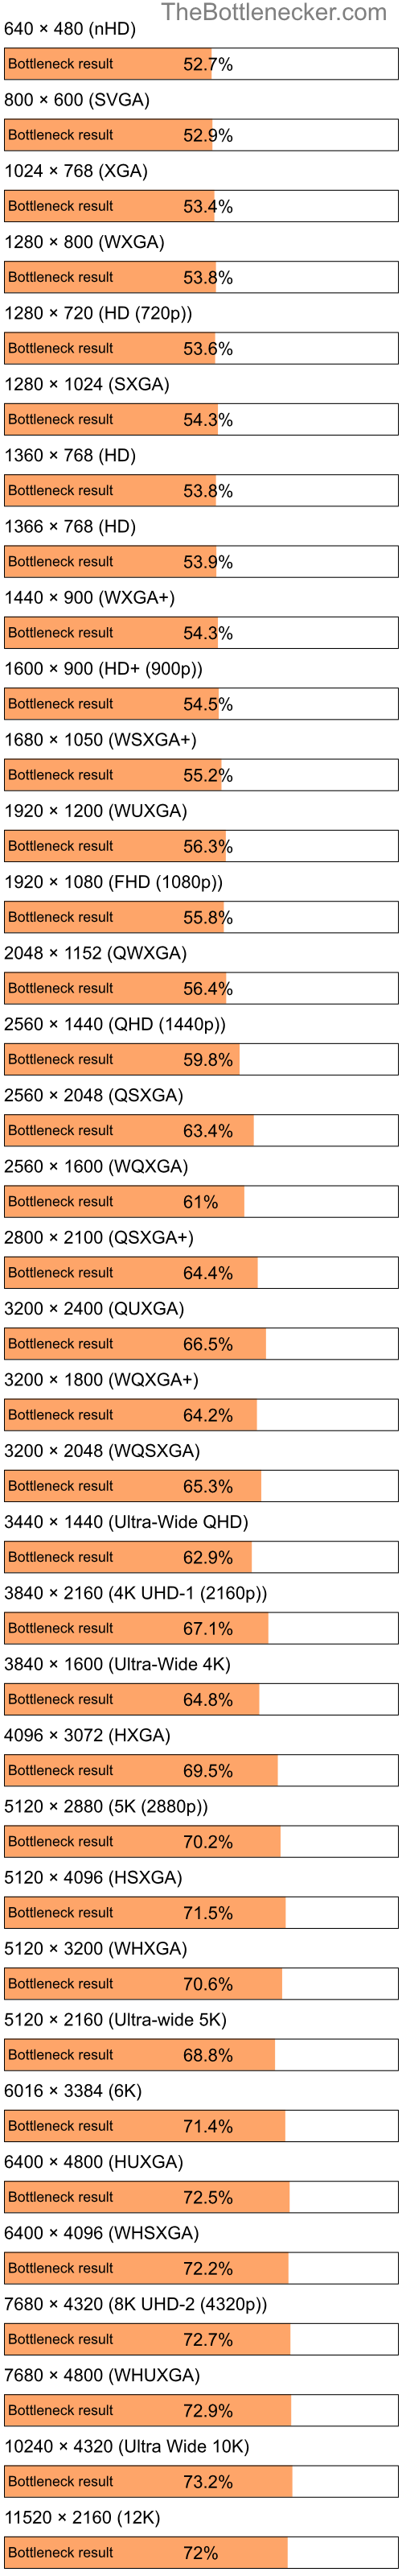 Bottleneck results by resolution for Intel Atom Z520 and AMD Mobility Radeon HD 4250 in Processor Intense Tasks